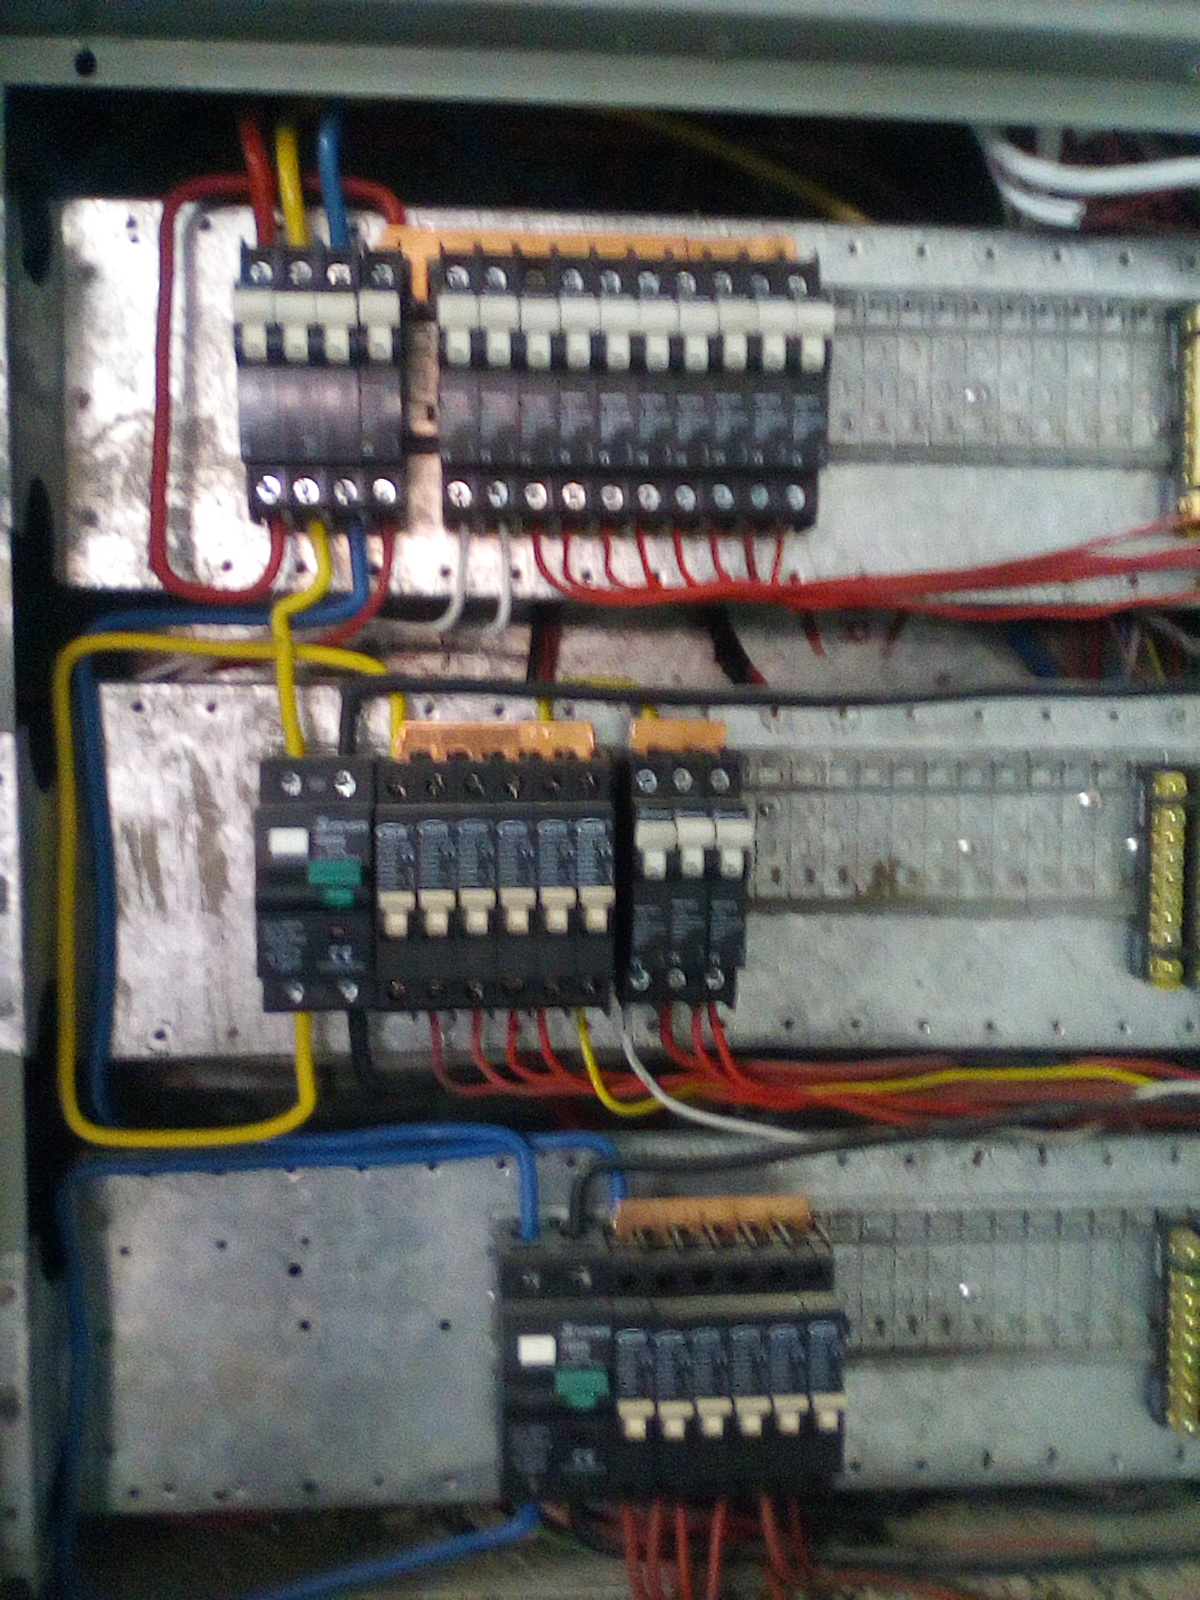 Db board re-wiring and upgrading 